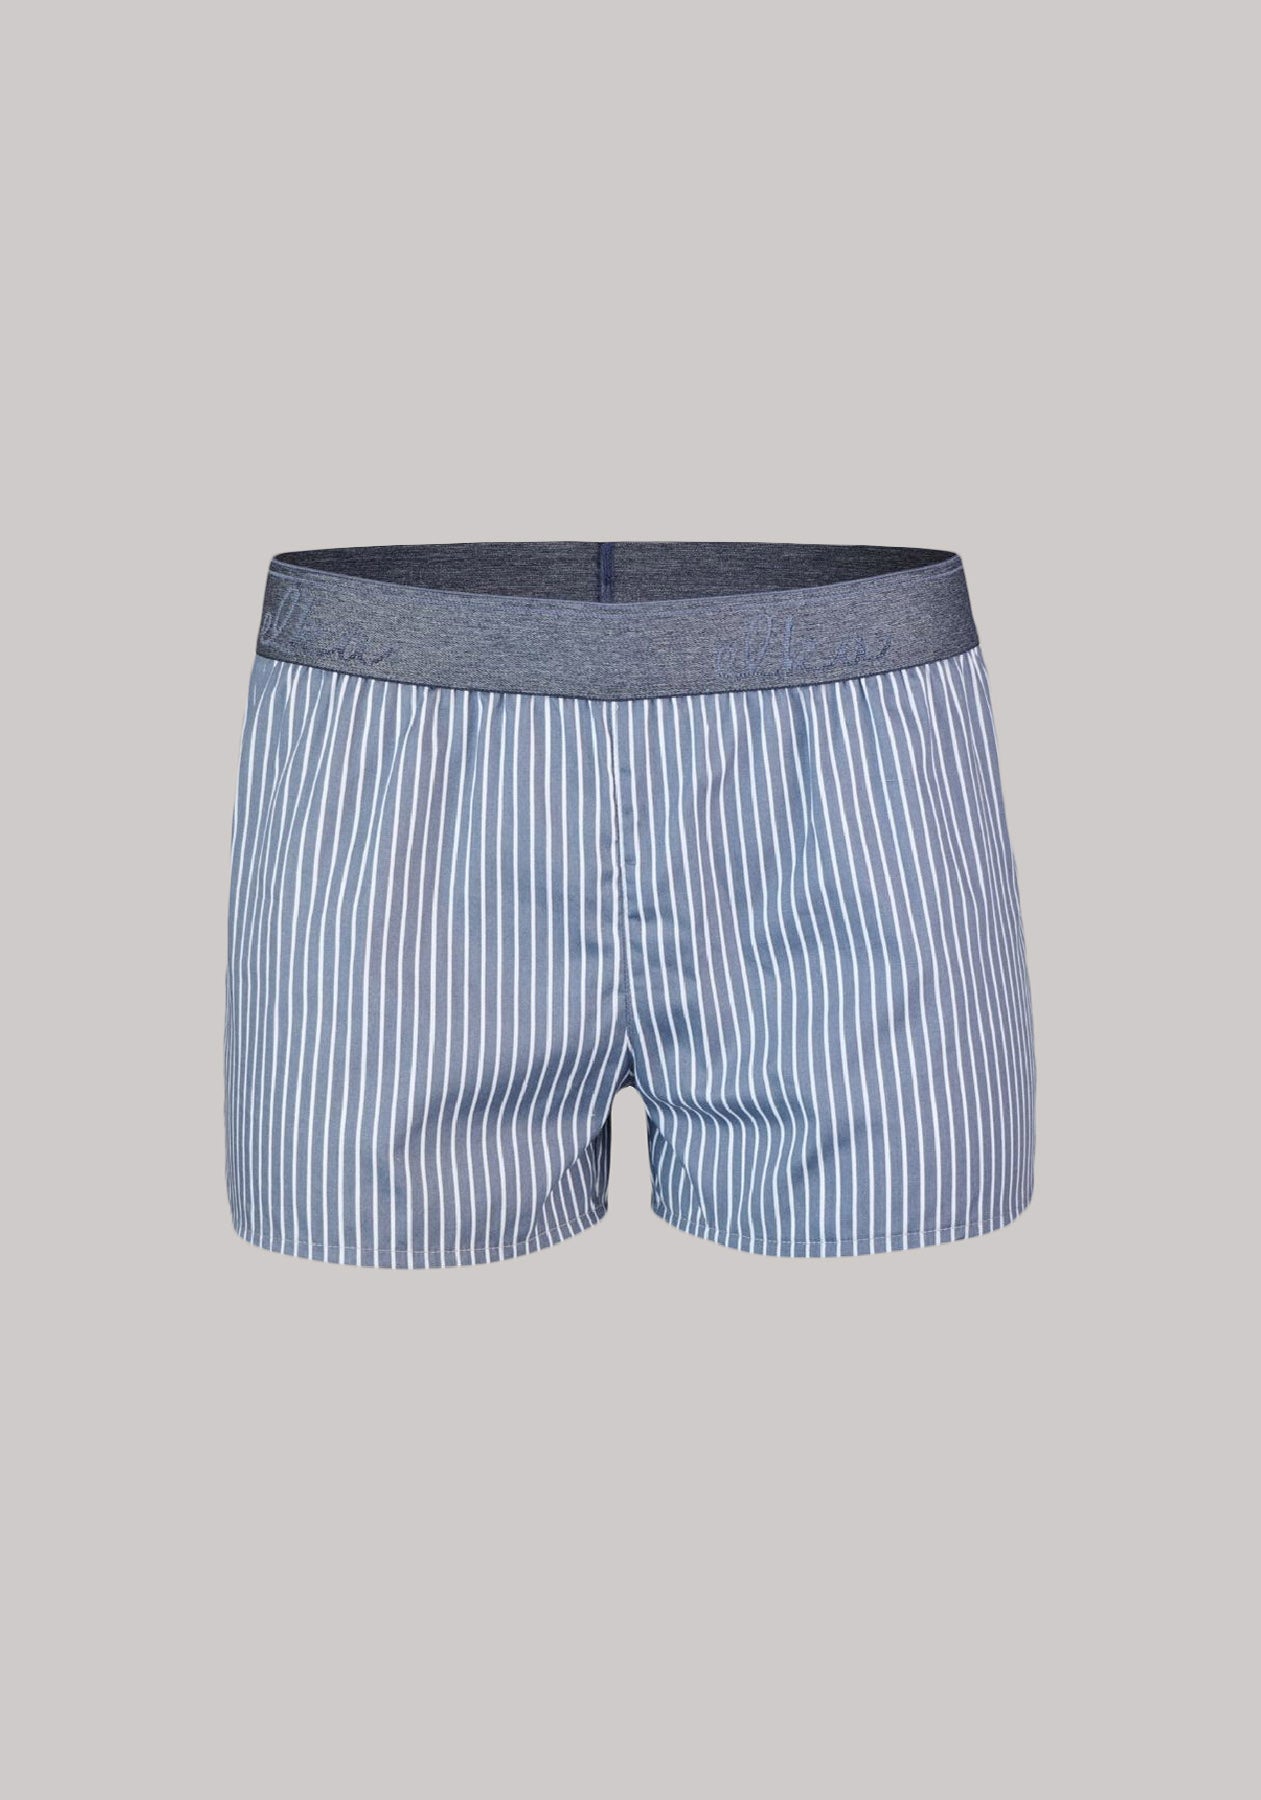 Women's shorts active Gray with stripes